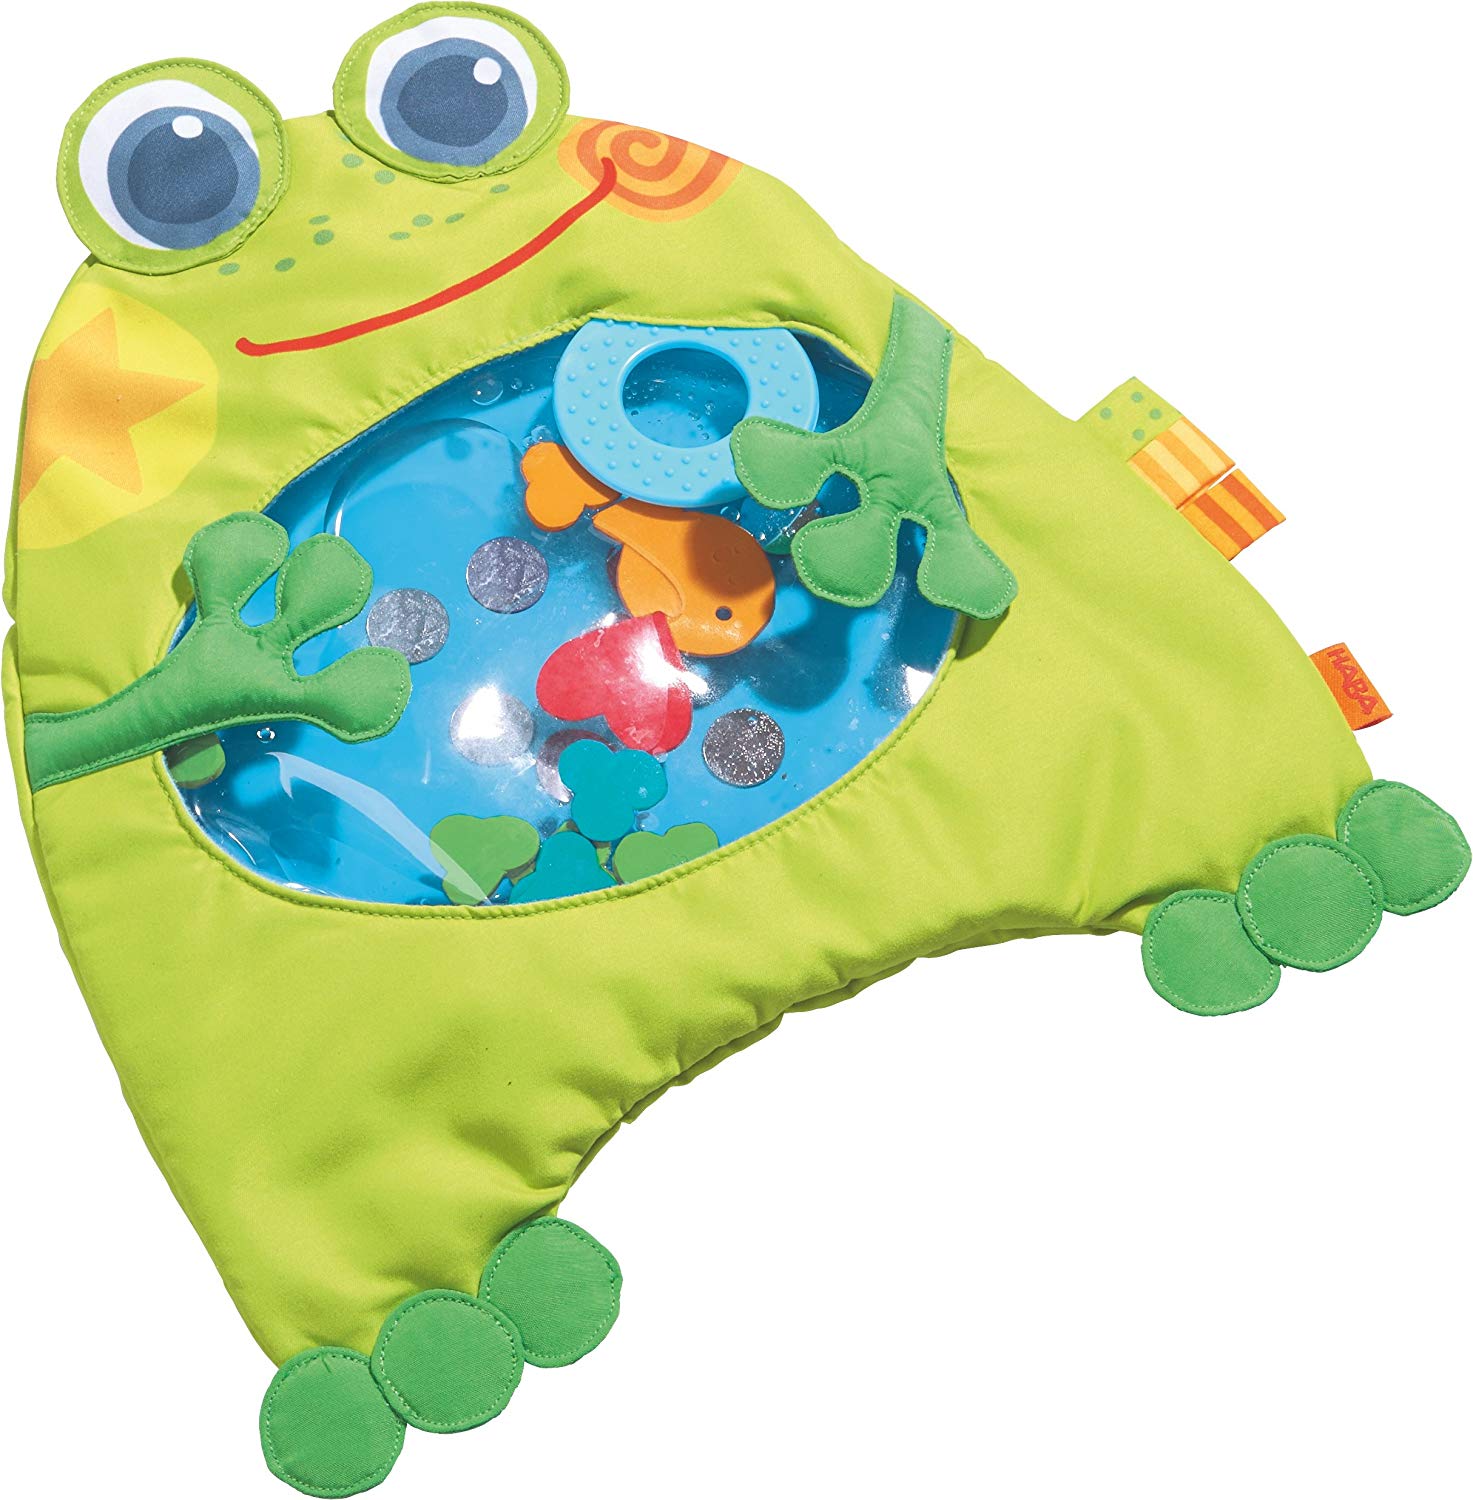 Haba Little Frog Water Play Mat Toy